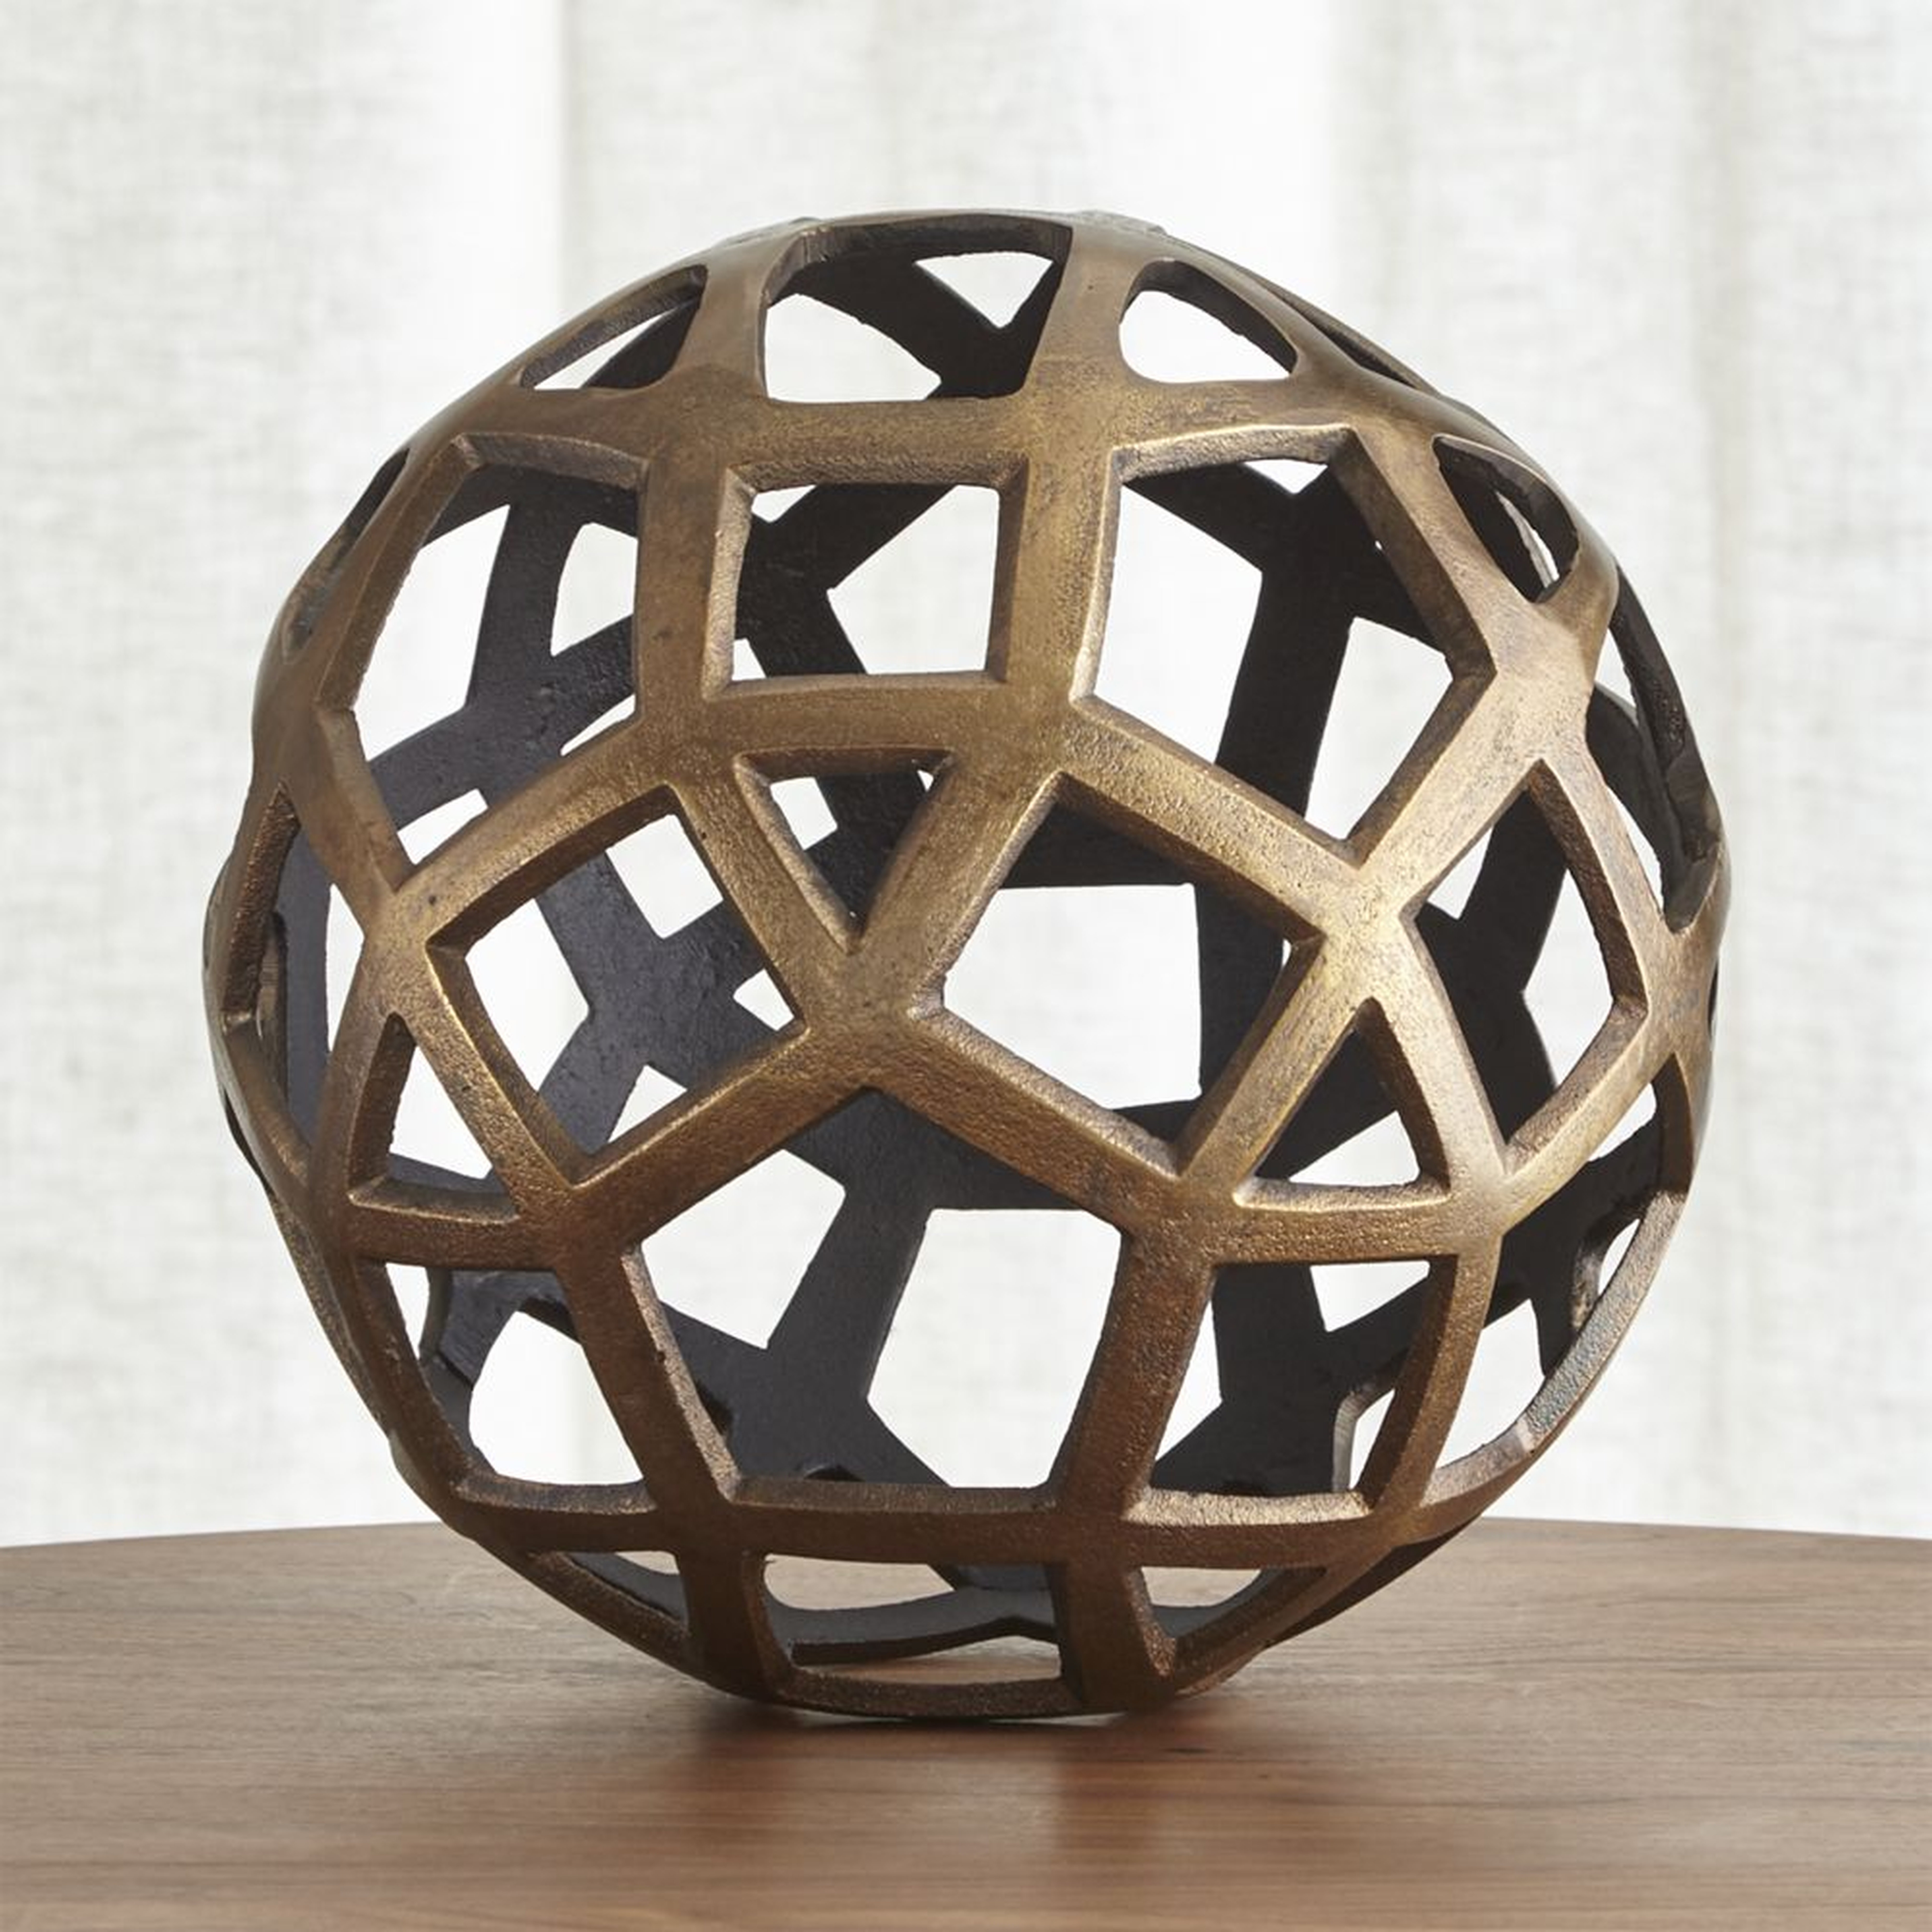 Geo Large Decorative Metal Ball - Crate and Barrel